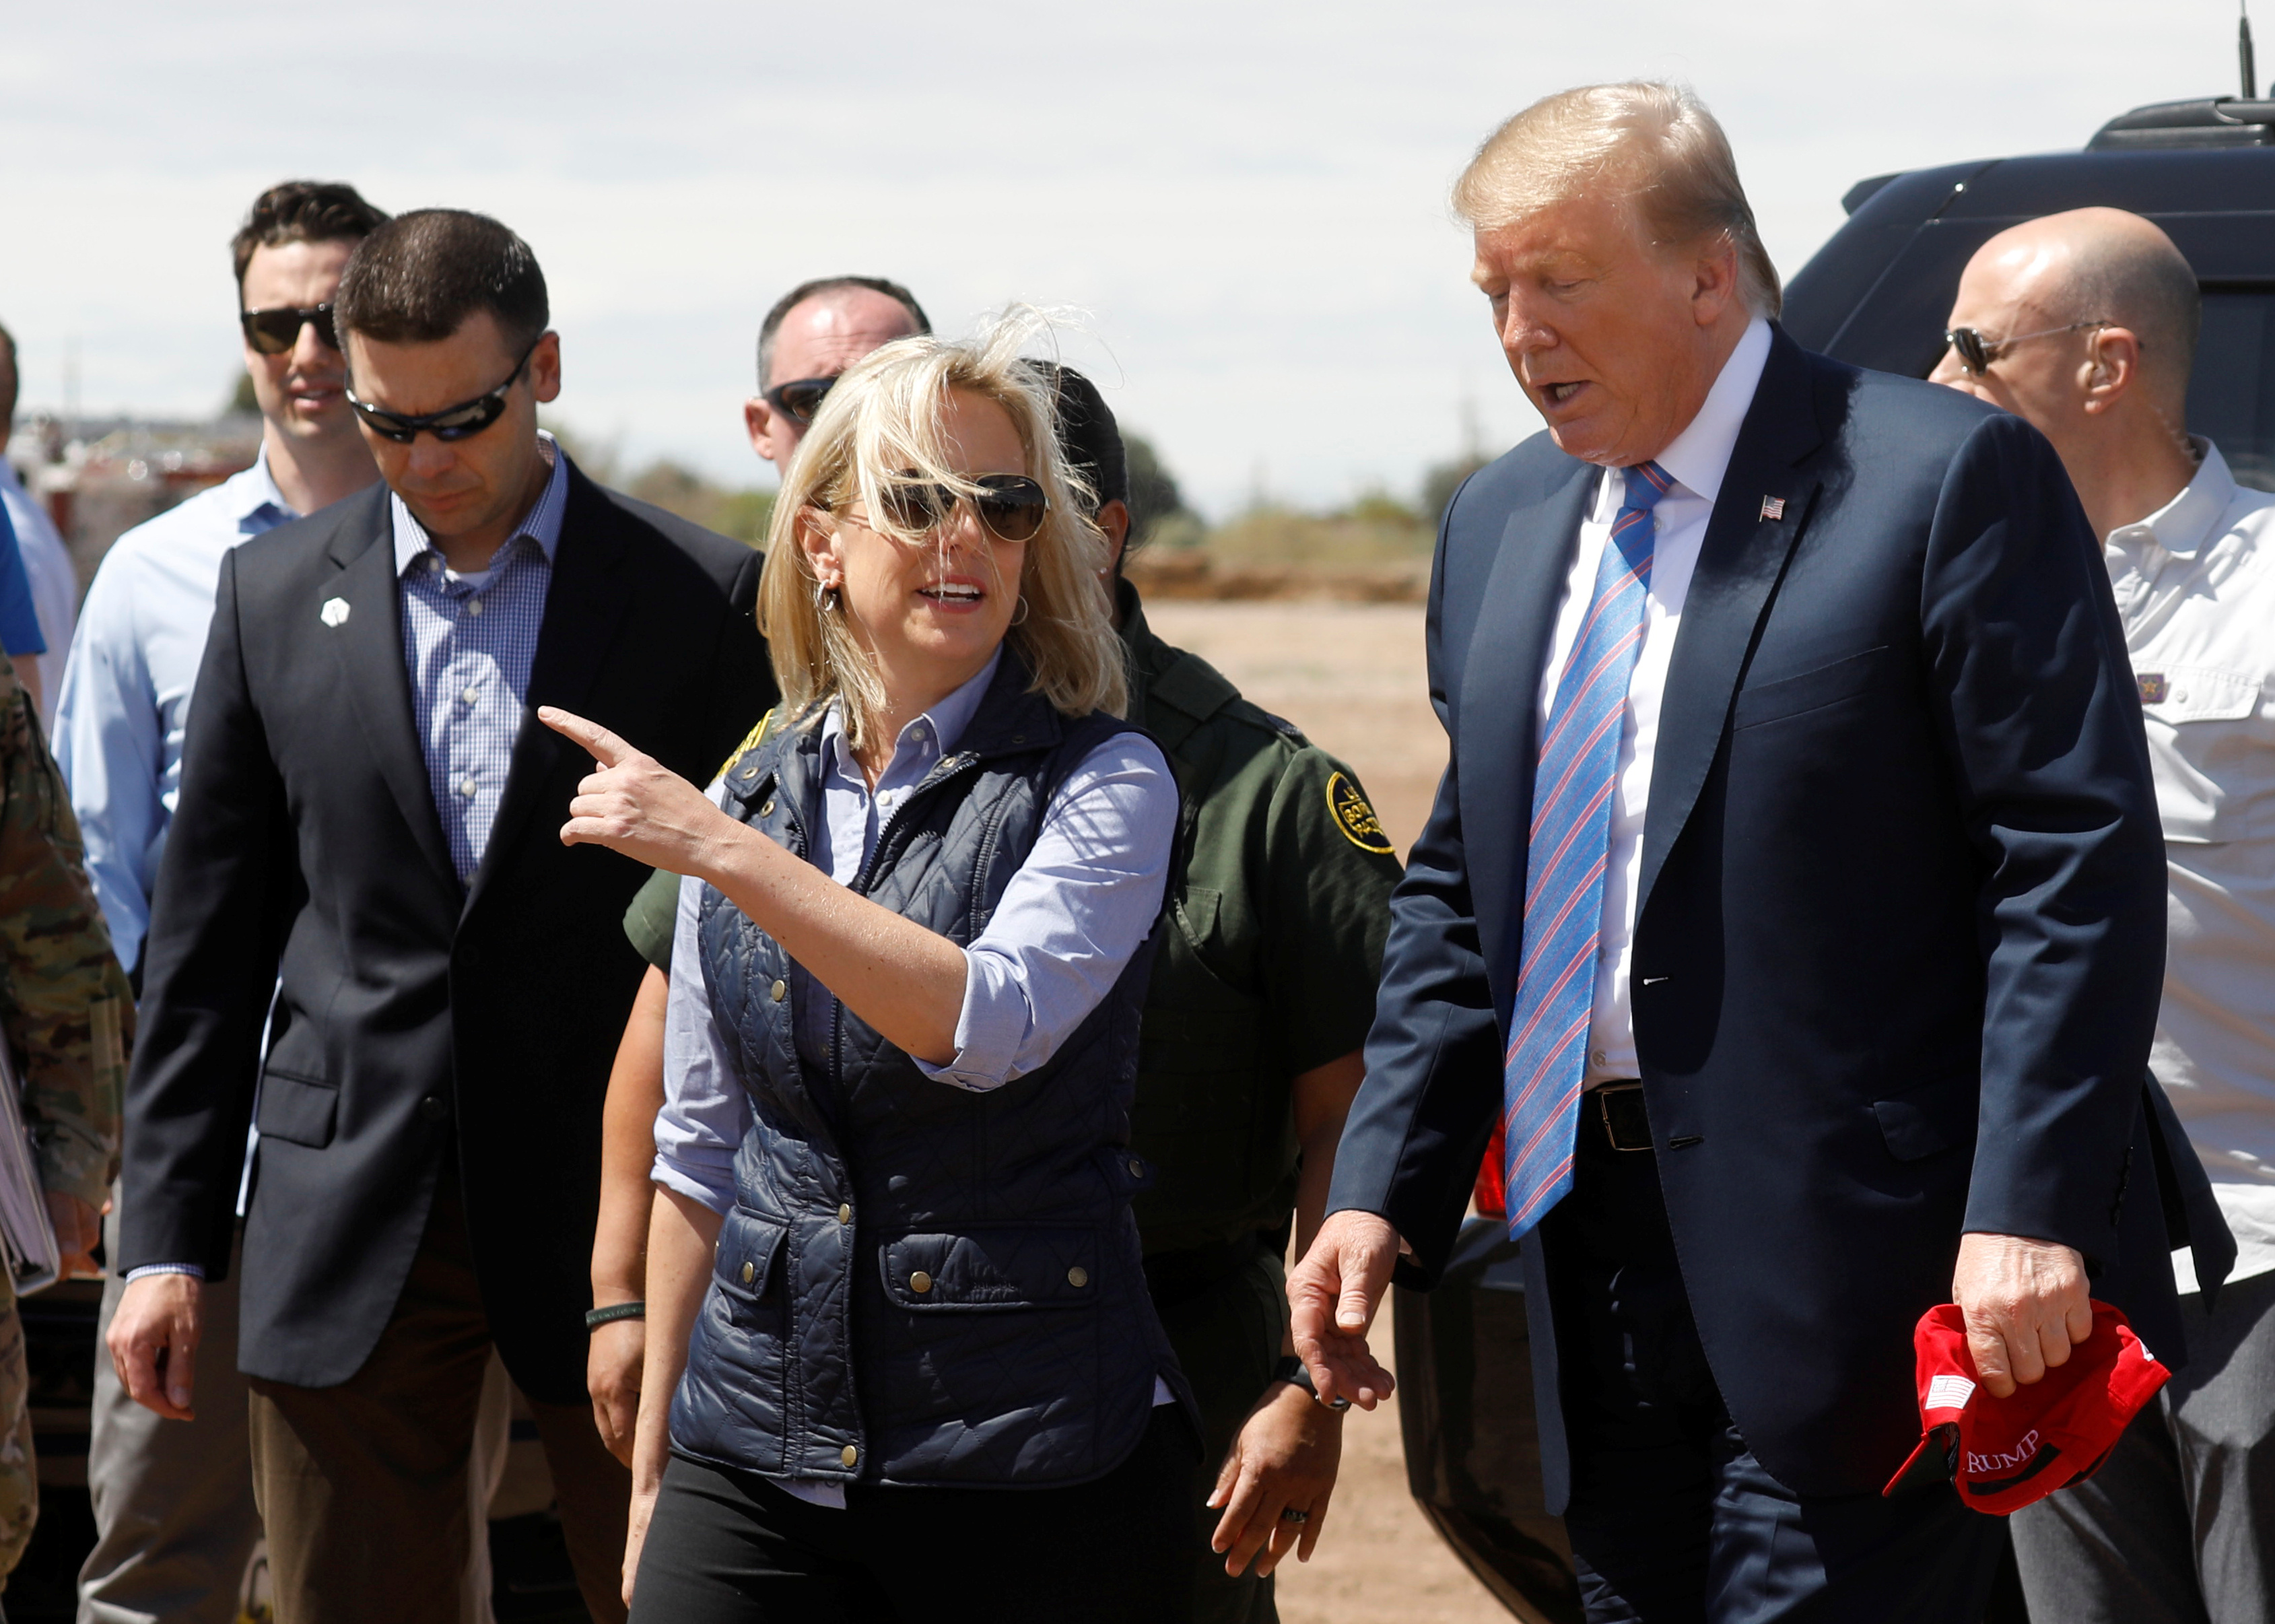 Nielsen and McAleenan walk with Trump at border security tour in California